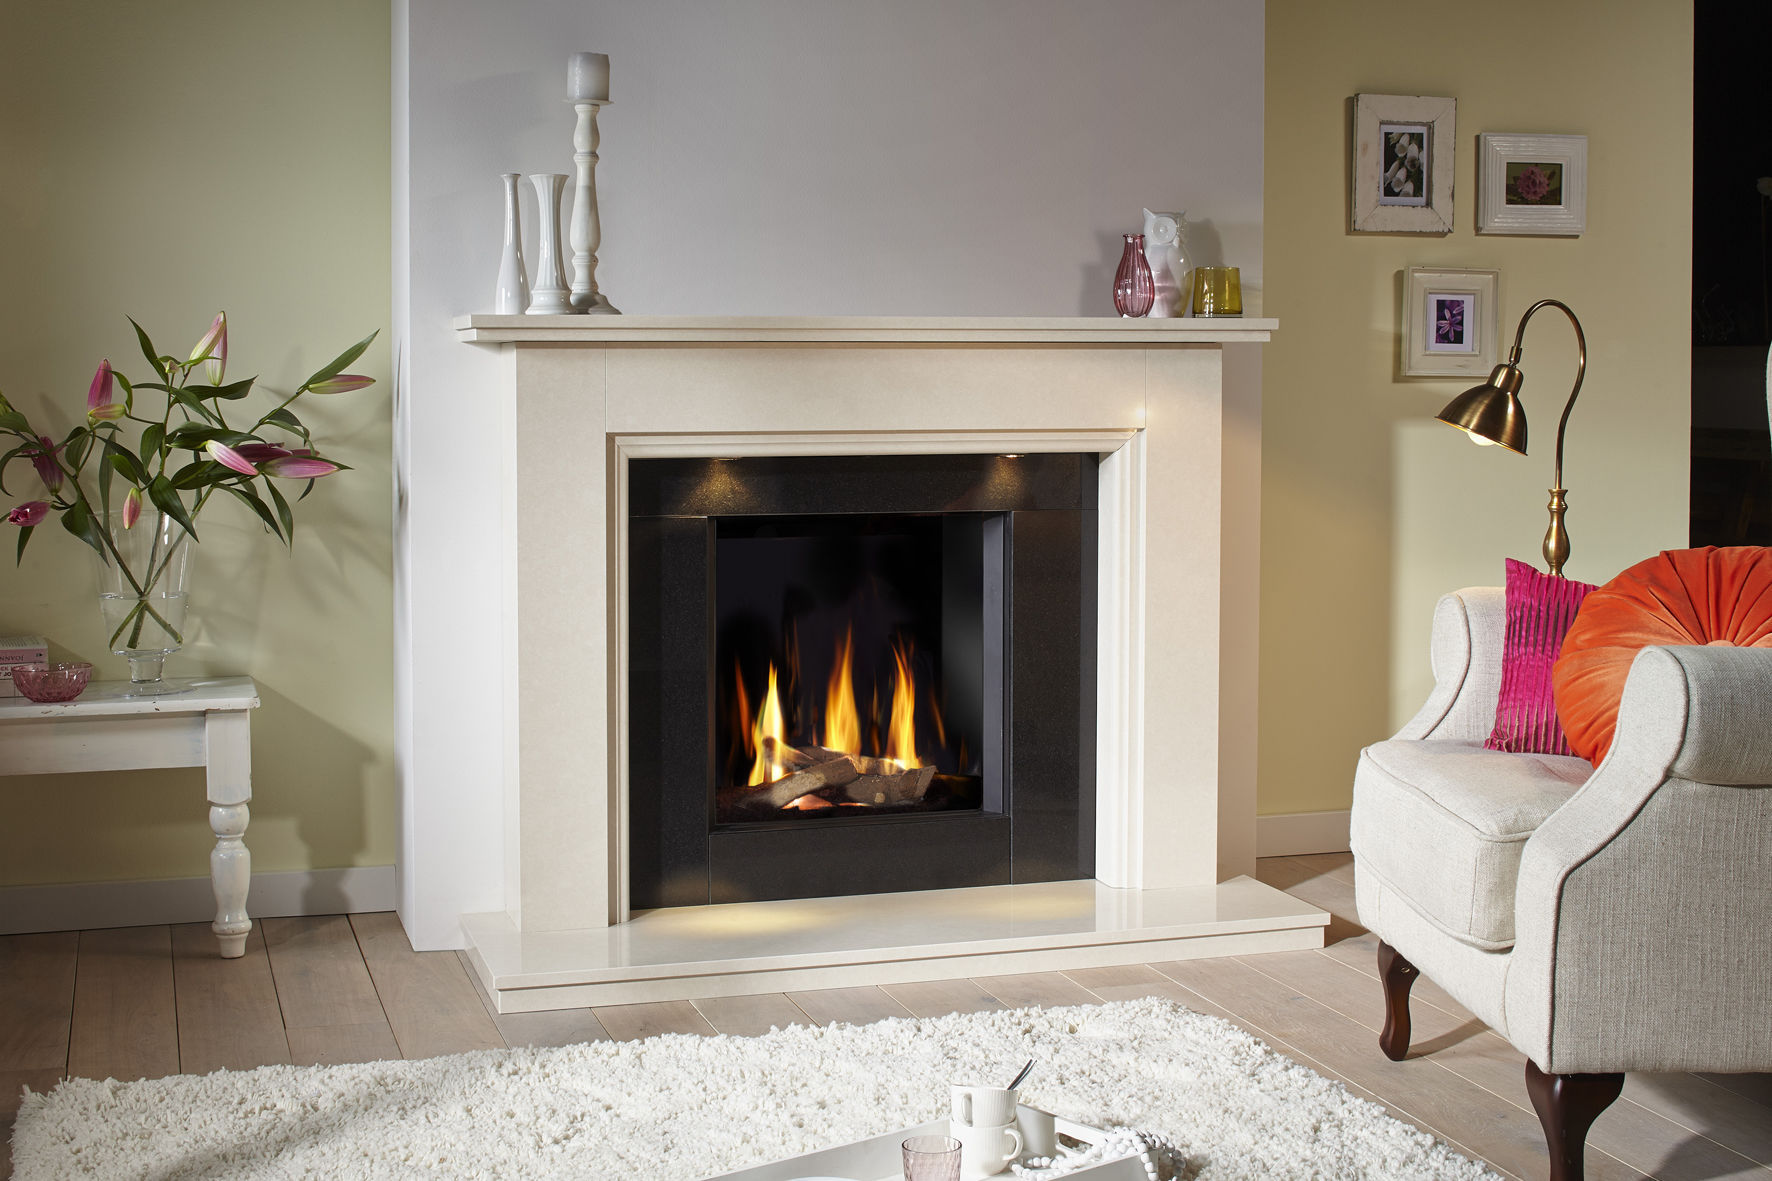 Gas fireplaces and wood burning. Top 10 Outdated Home Decorating Trends to Avoid - 19